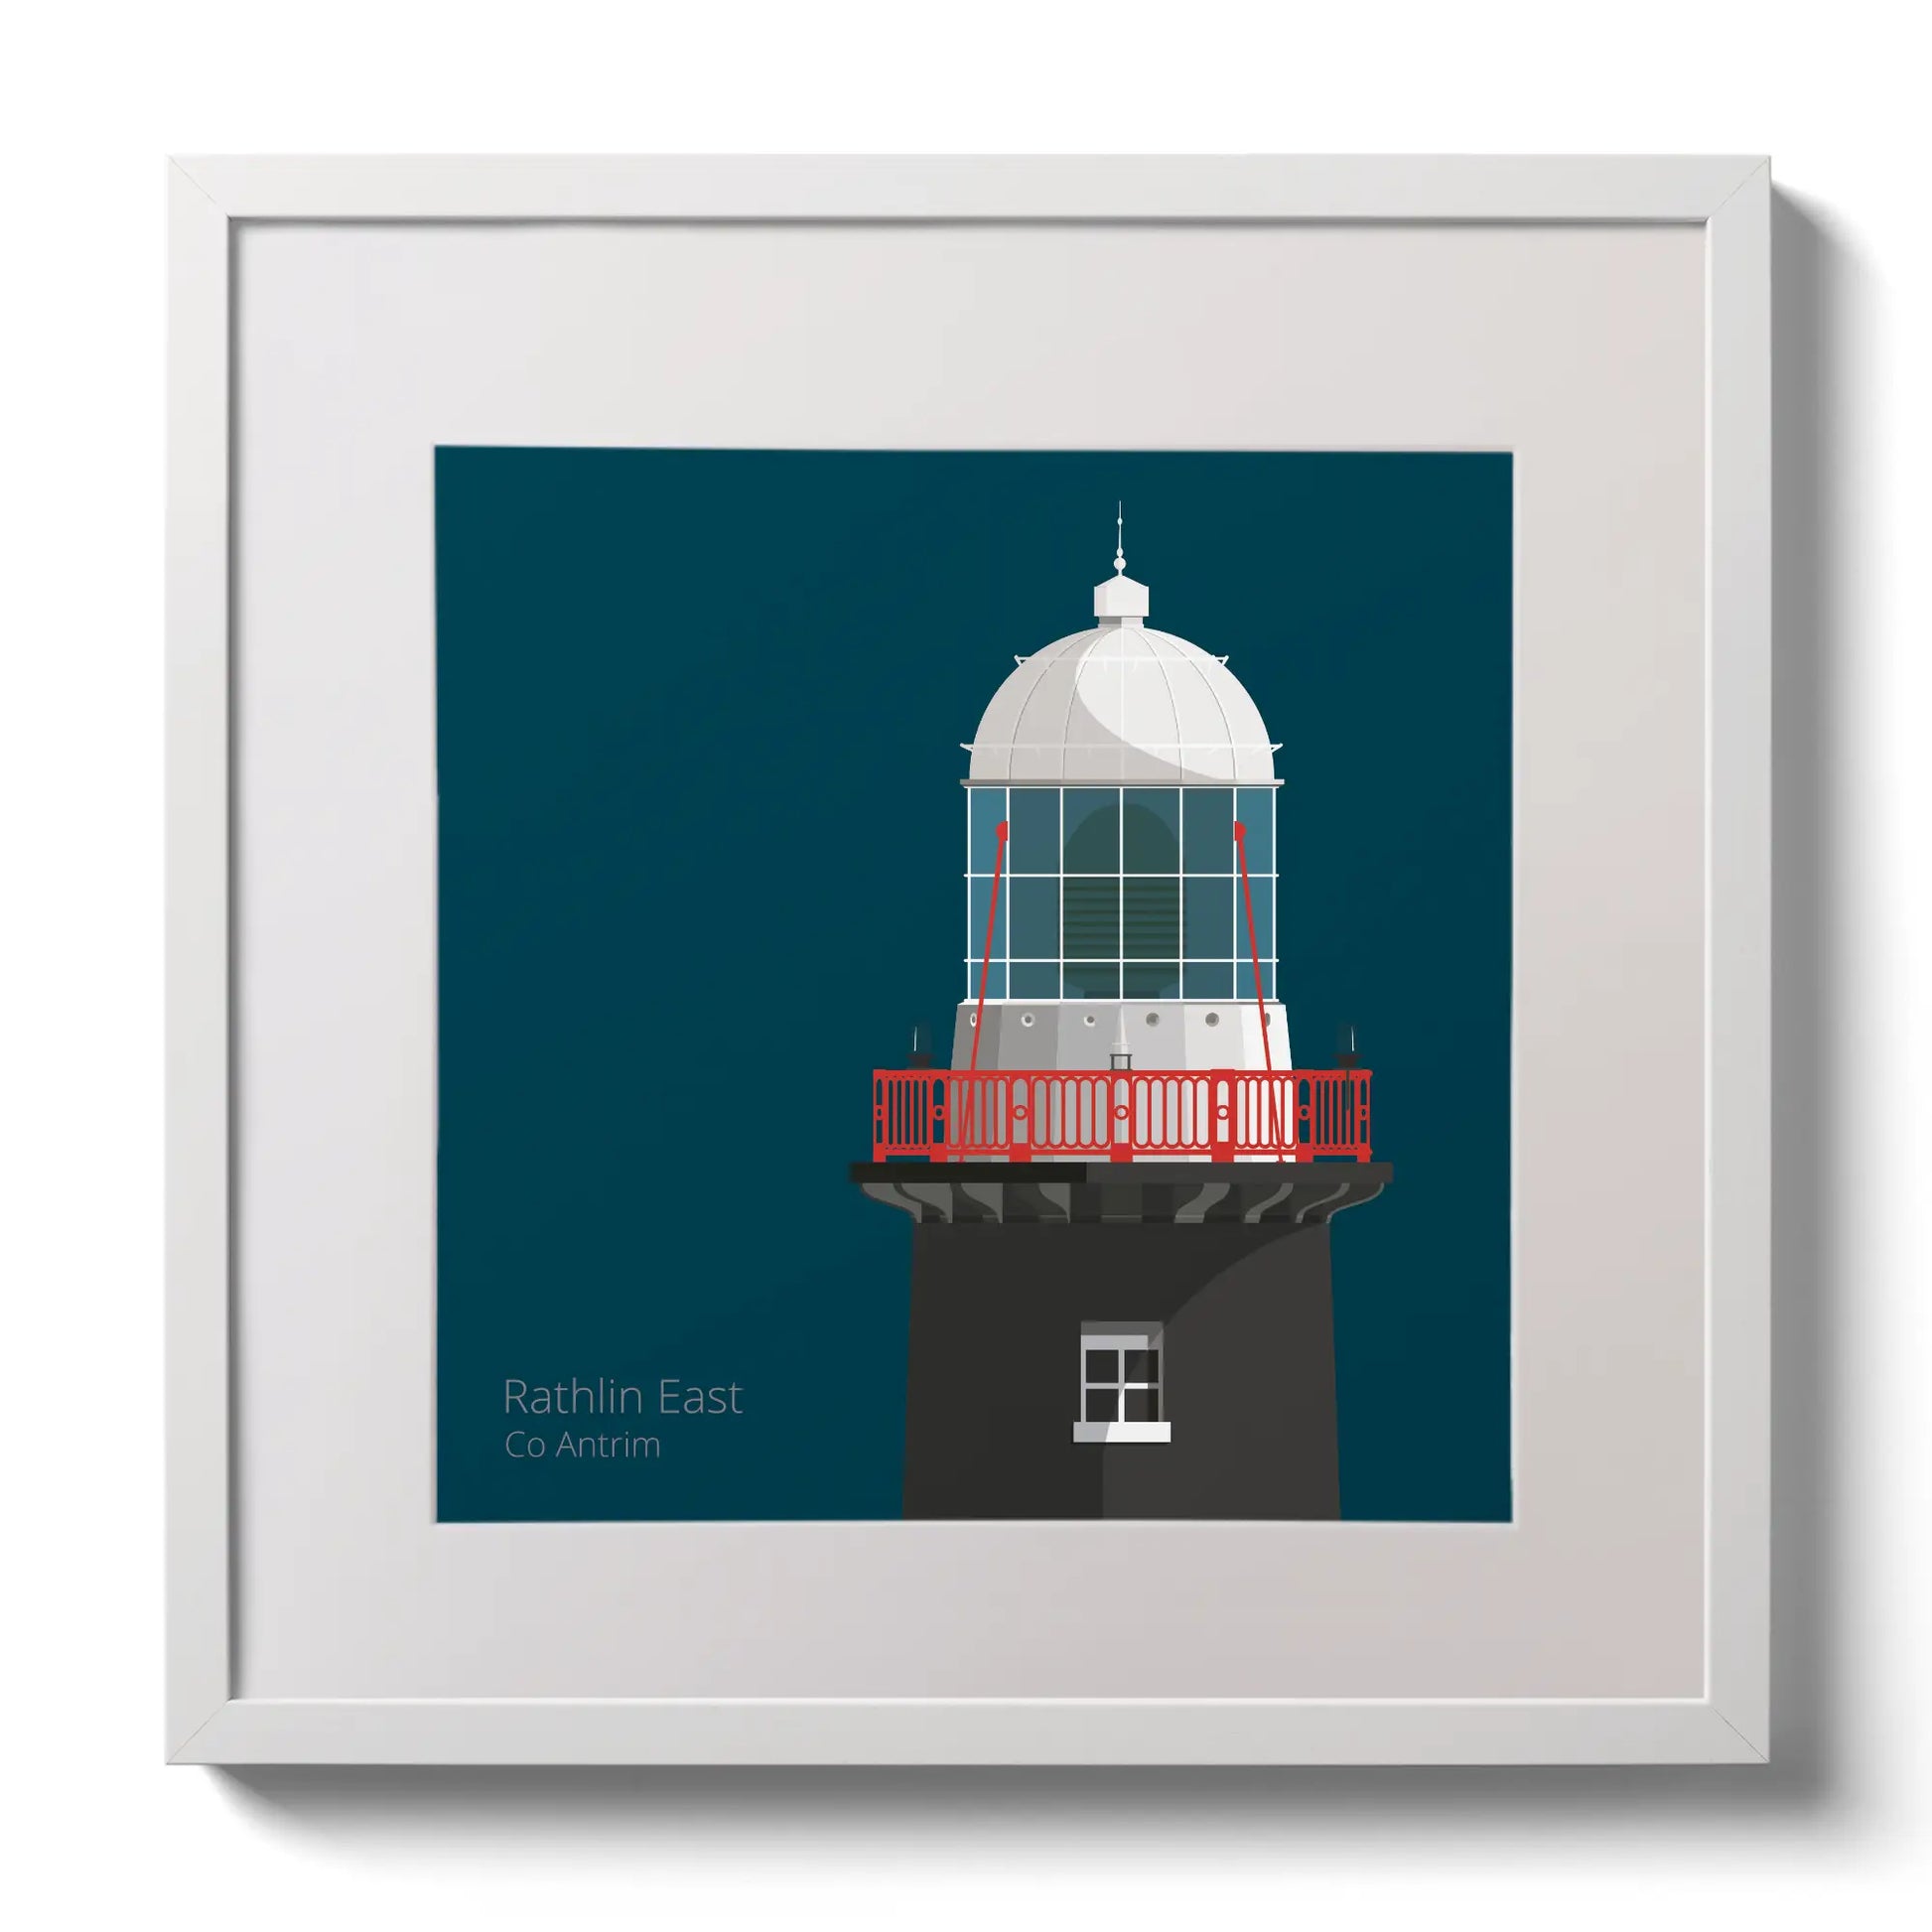 Illustration of Rathlin East lighthouse on a midnight blue background,  in a white square frame measuring 30x30cm.